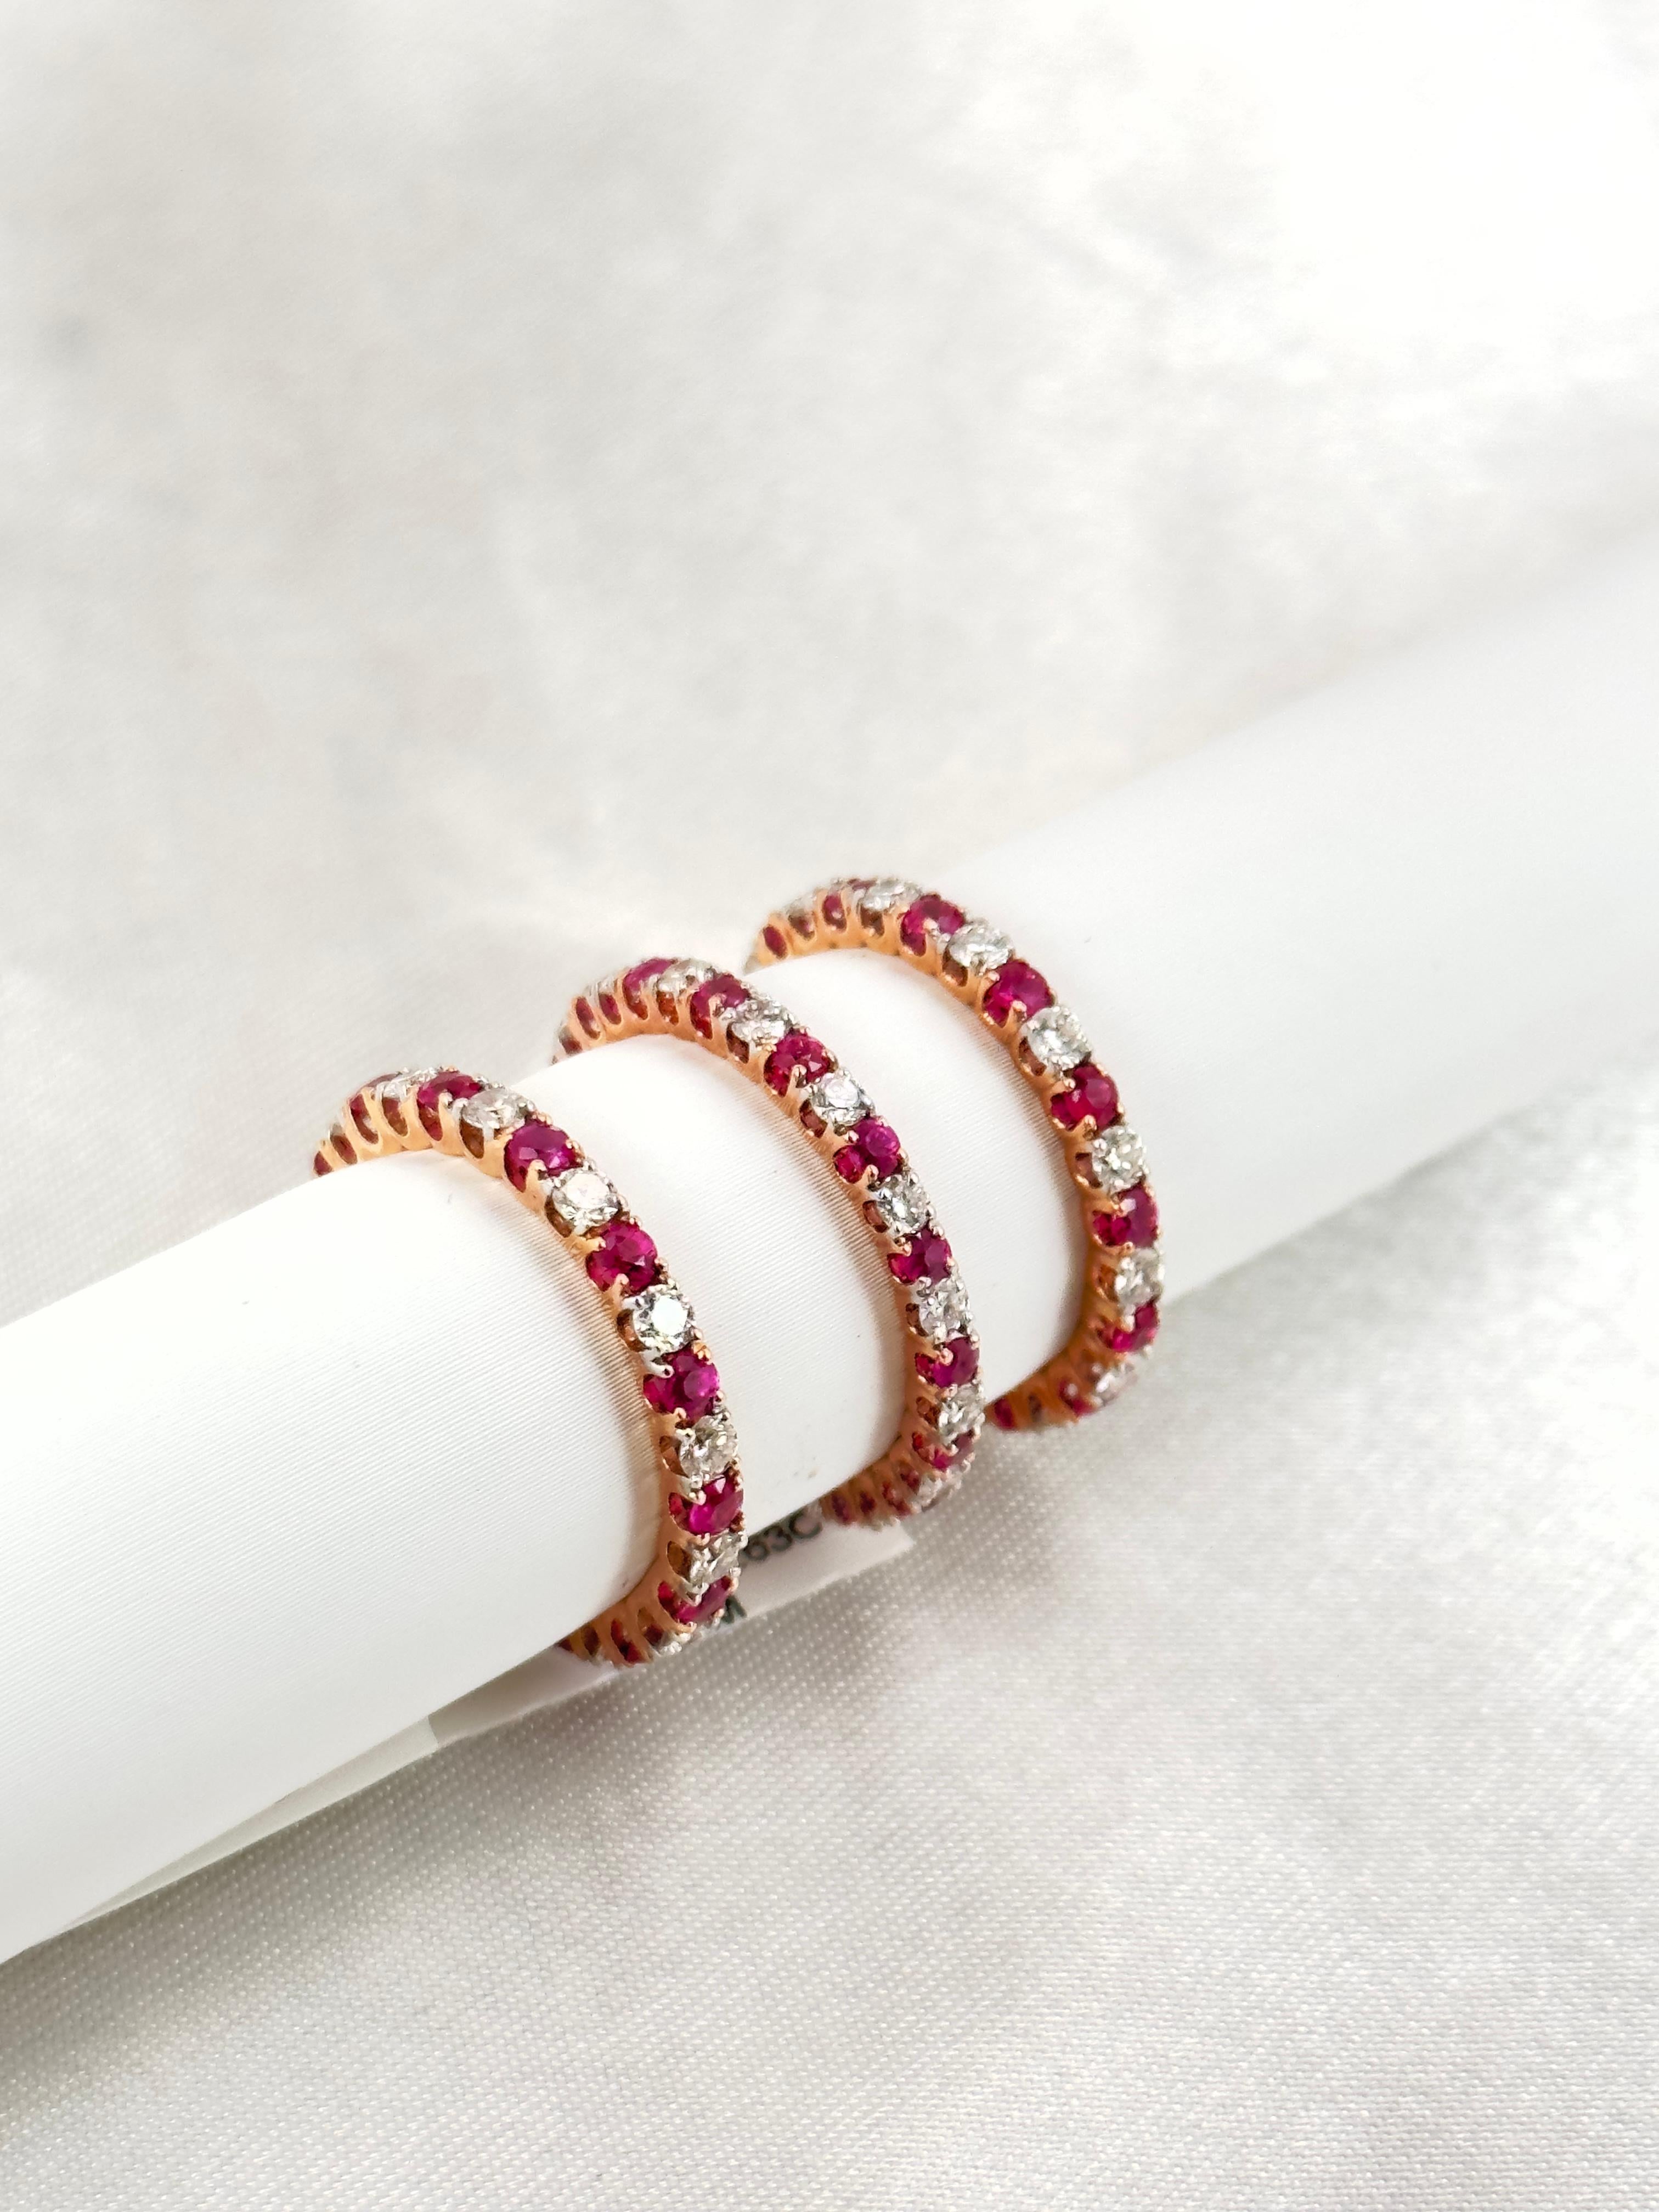 Women's Ruby and Diamond Eternity Band Stacks, Gemstone Dainty Bands, Stackable Bands For Sale